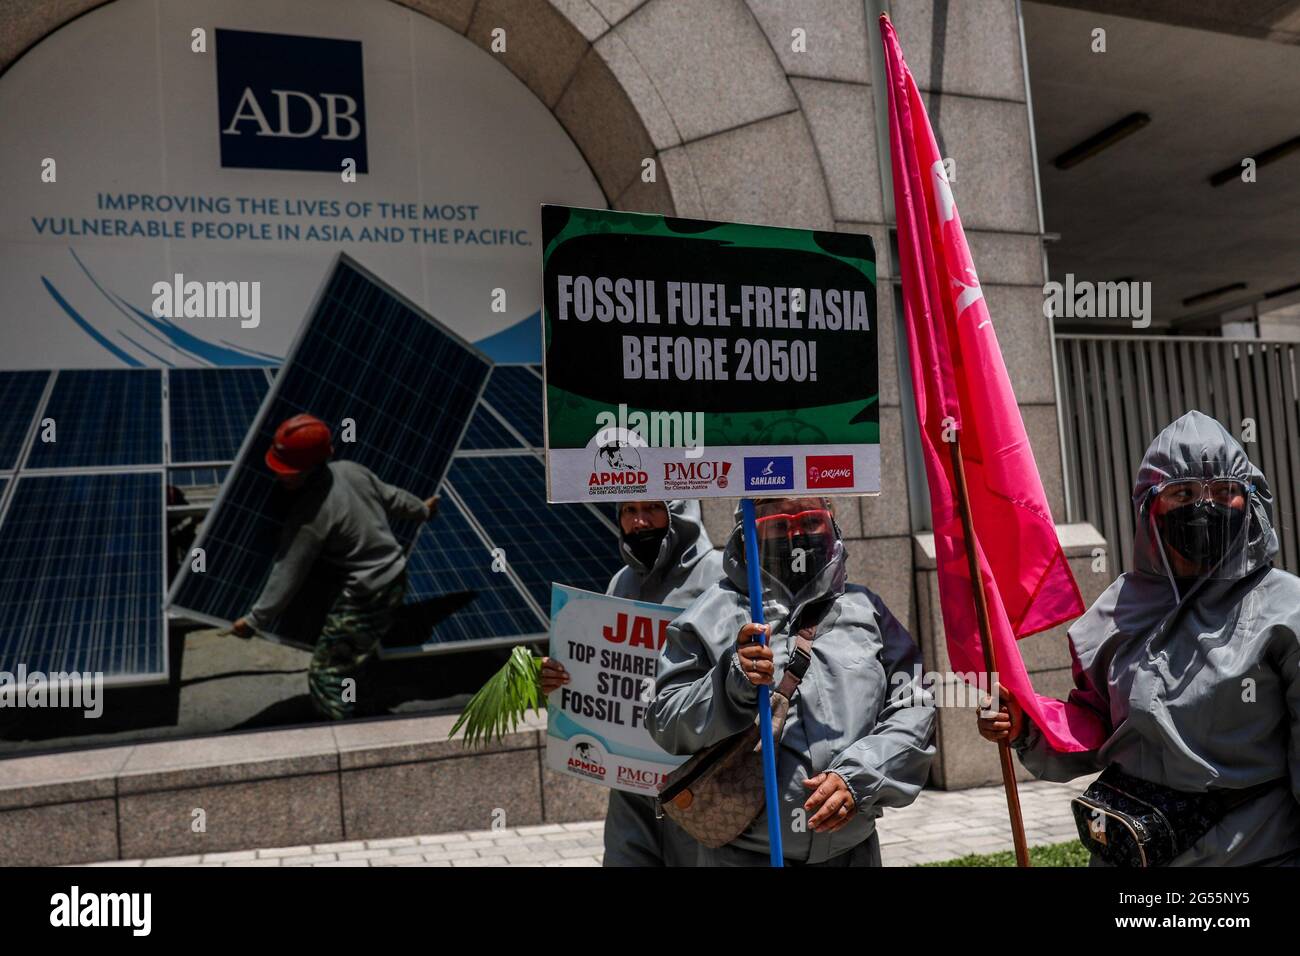 Climate activists dressed in PPE suits protest outside the Asian Development Bank (ADB) headquarters in Mandaluyong City. The group called on ADB—currently hosting the Asia Clean Energy Forum—and participating financial institutions to stop funding fossil fuel projects and make the shift to renewable energy. Metro Manila, Philippines. Stock Photo